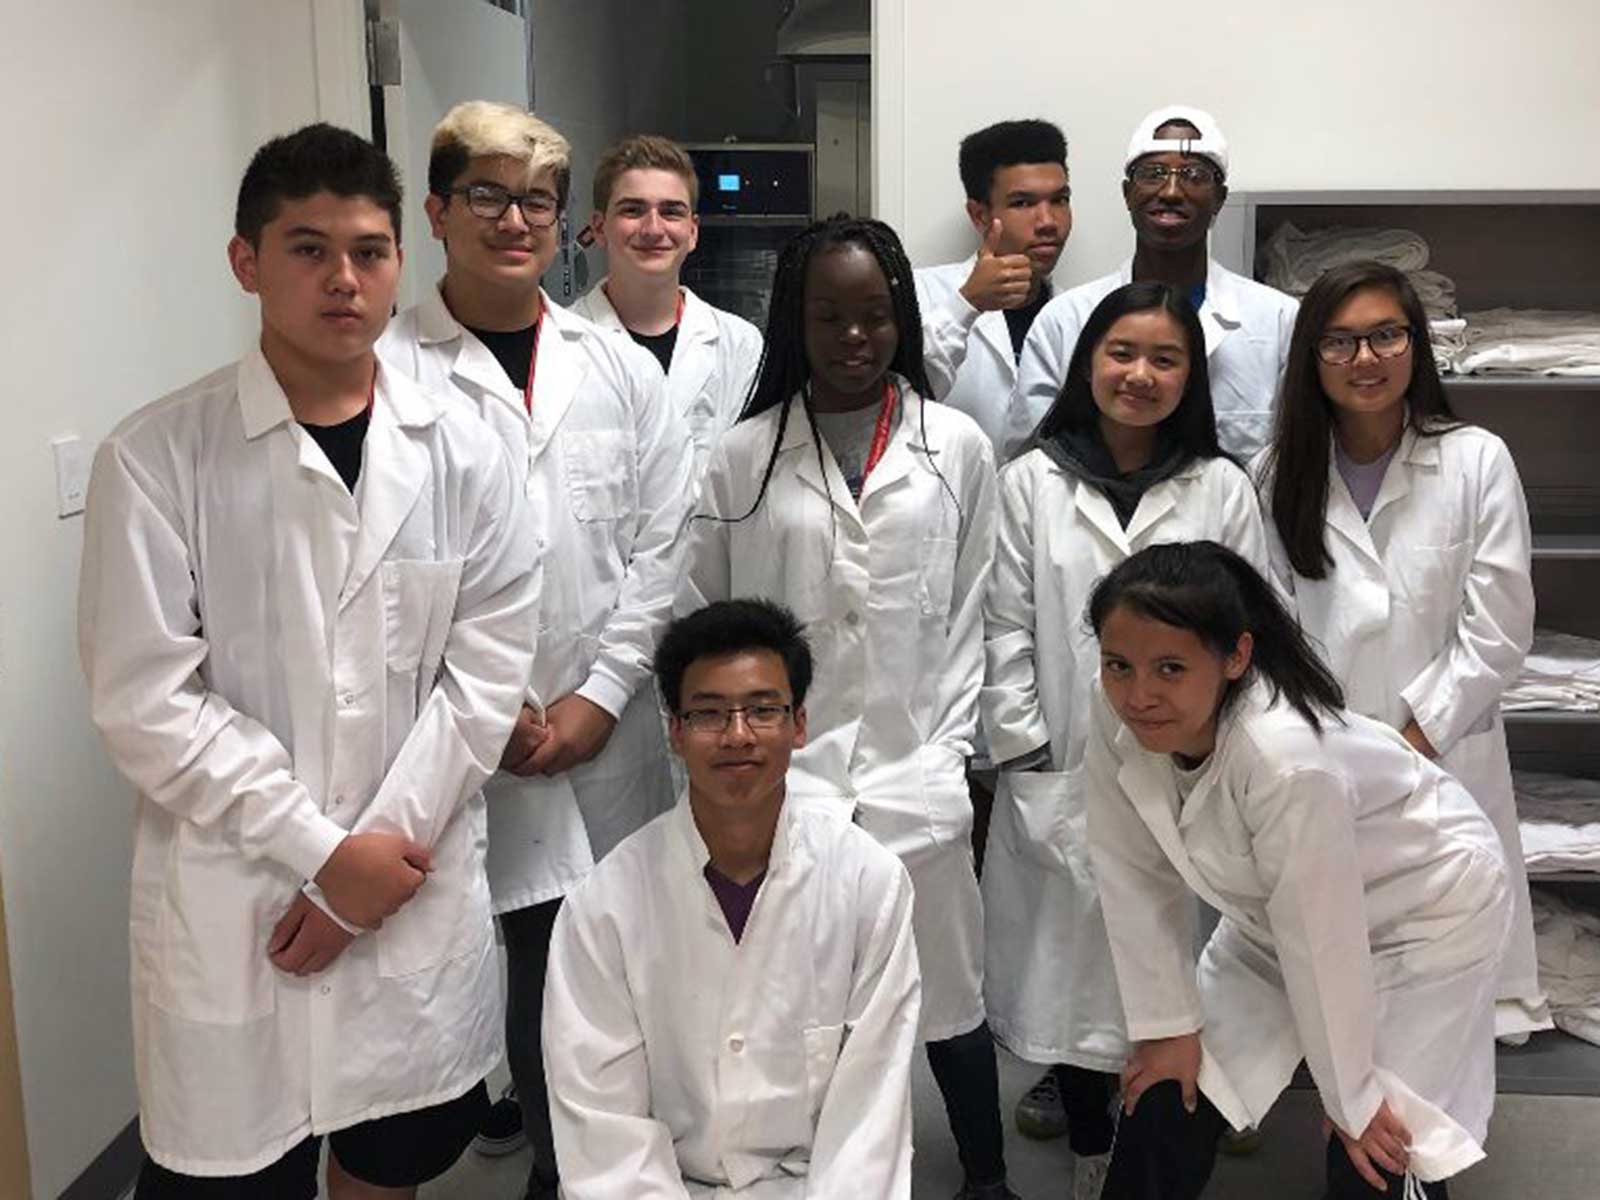 Students pose in lab coats